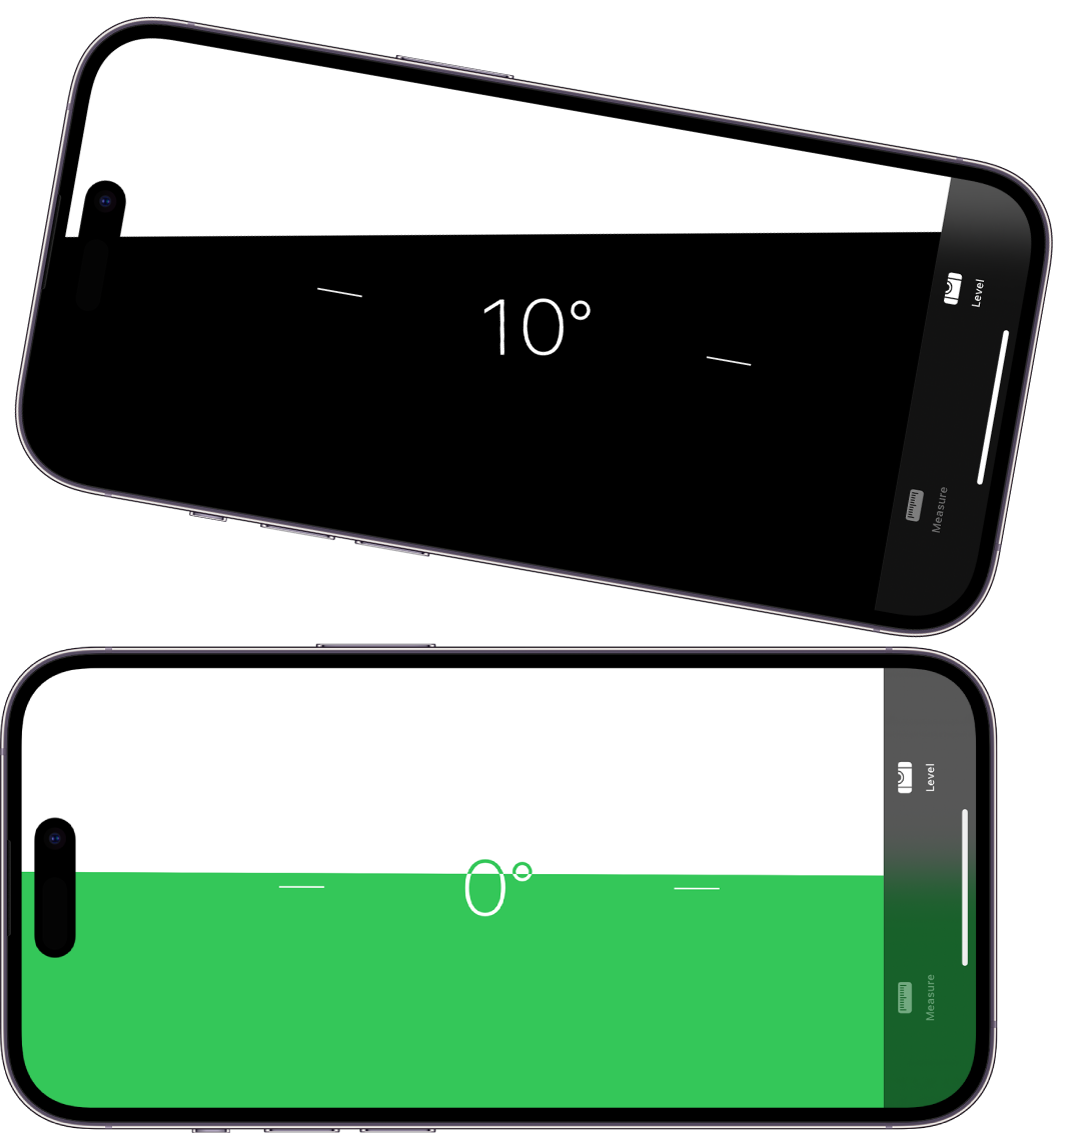 The level screen in the Measure app. On the top, iPhone is tilted at an angle of 10 degrees; on the bottom, iPhone is level.